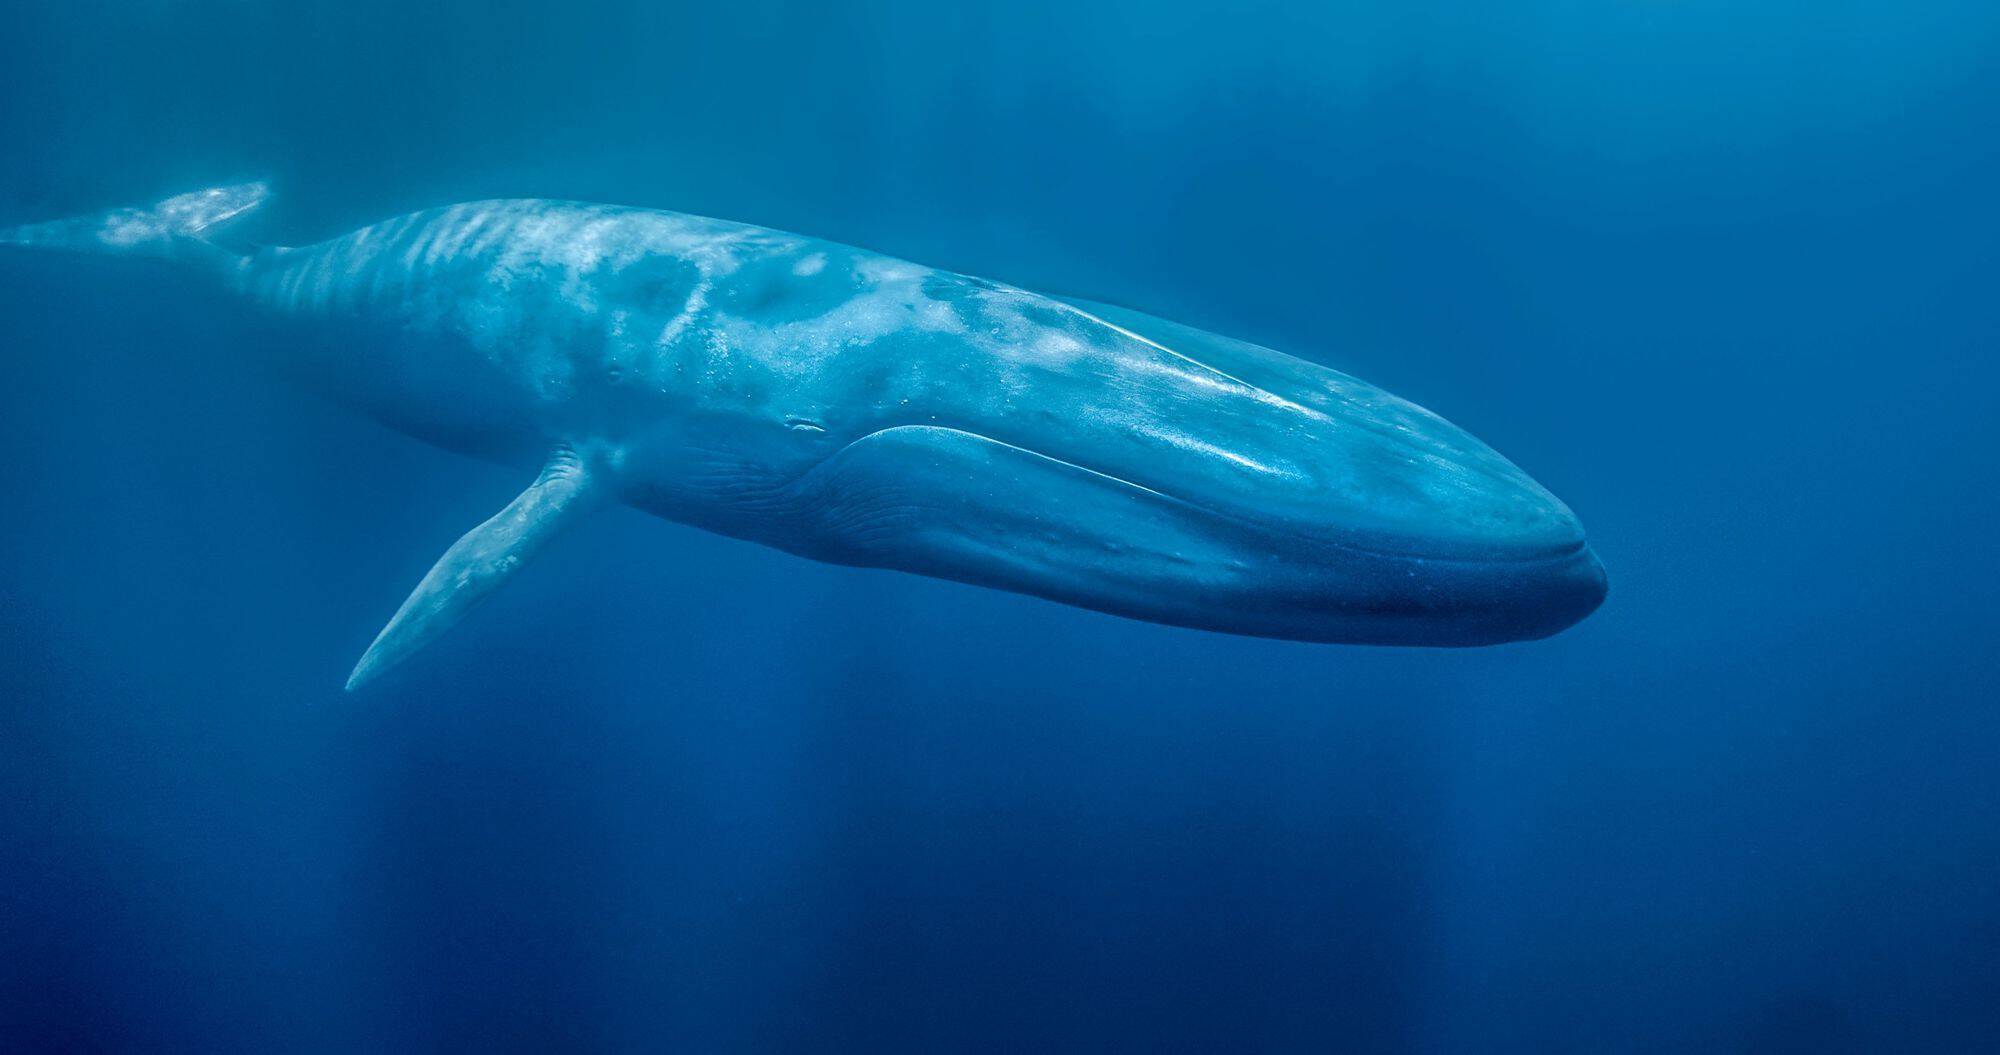 Although blue whales have hearts that are about the size of a small car, their eyes measure about 6 inches across.